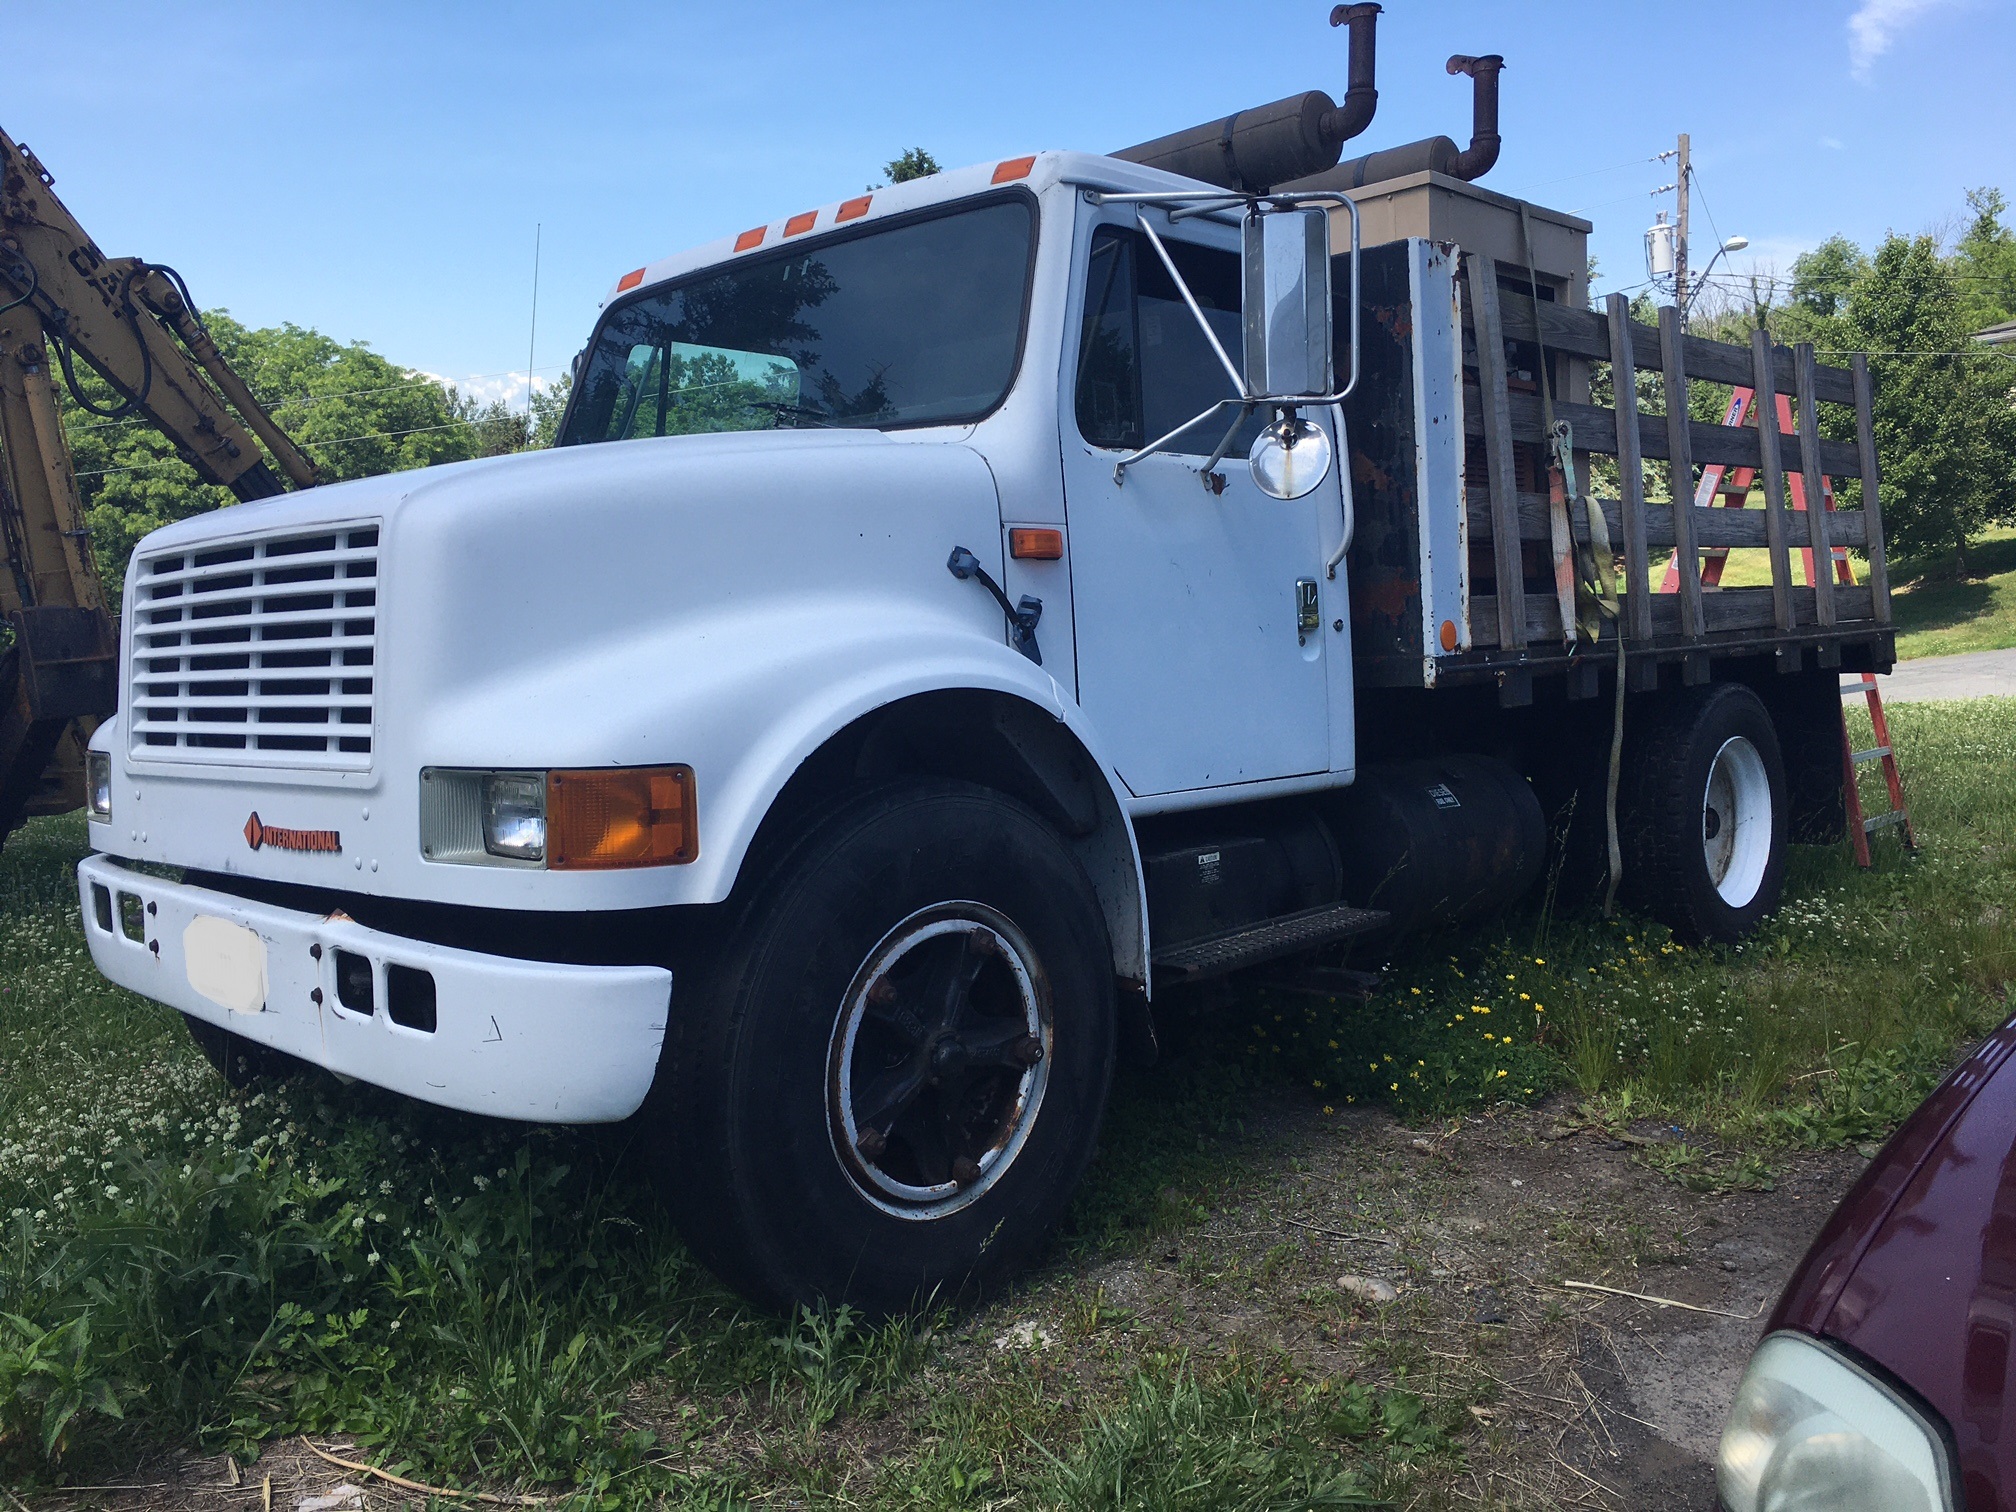 1990 International Flatbed Truck. 7.3 V8 diesel engine with 169,657 miles. Automatic Allison transmission. Air ride rear suspension. 12 foot long bed. 95" inches wide to the pockets. 236 inch wheel base.